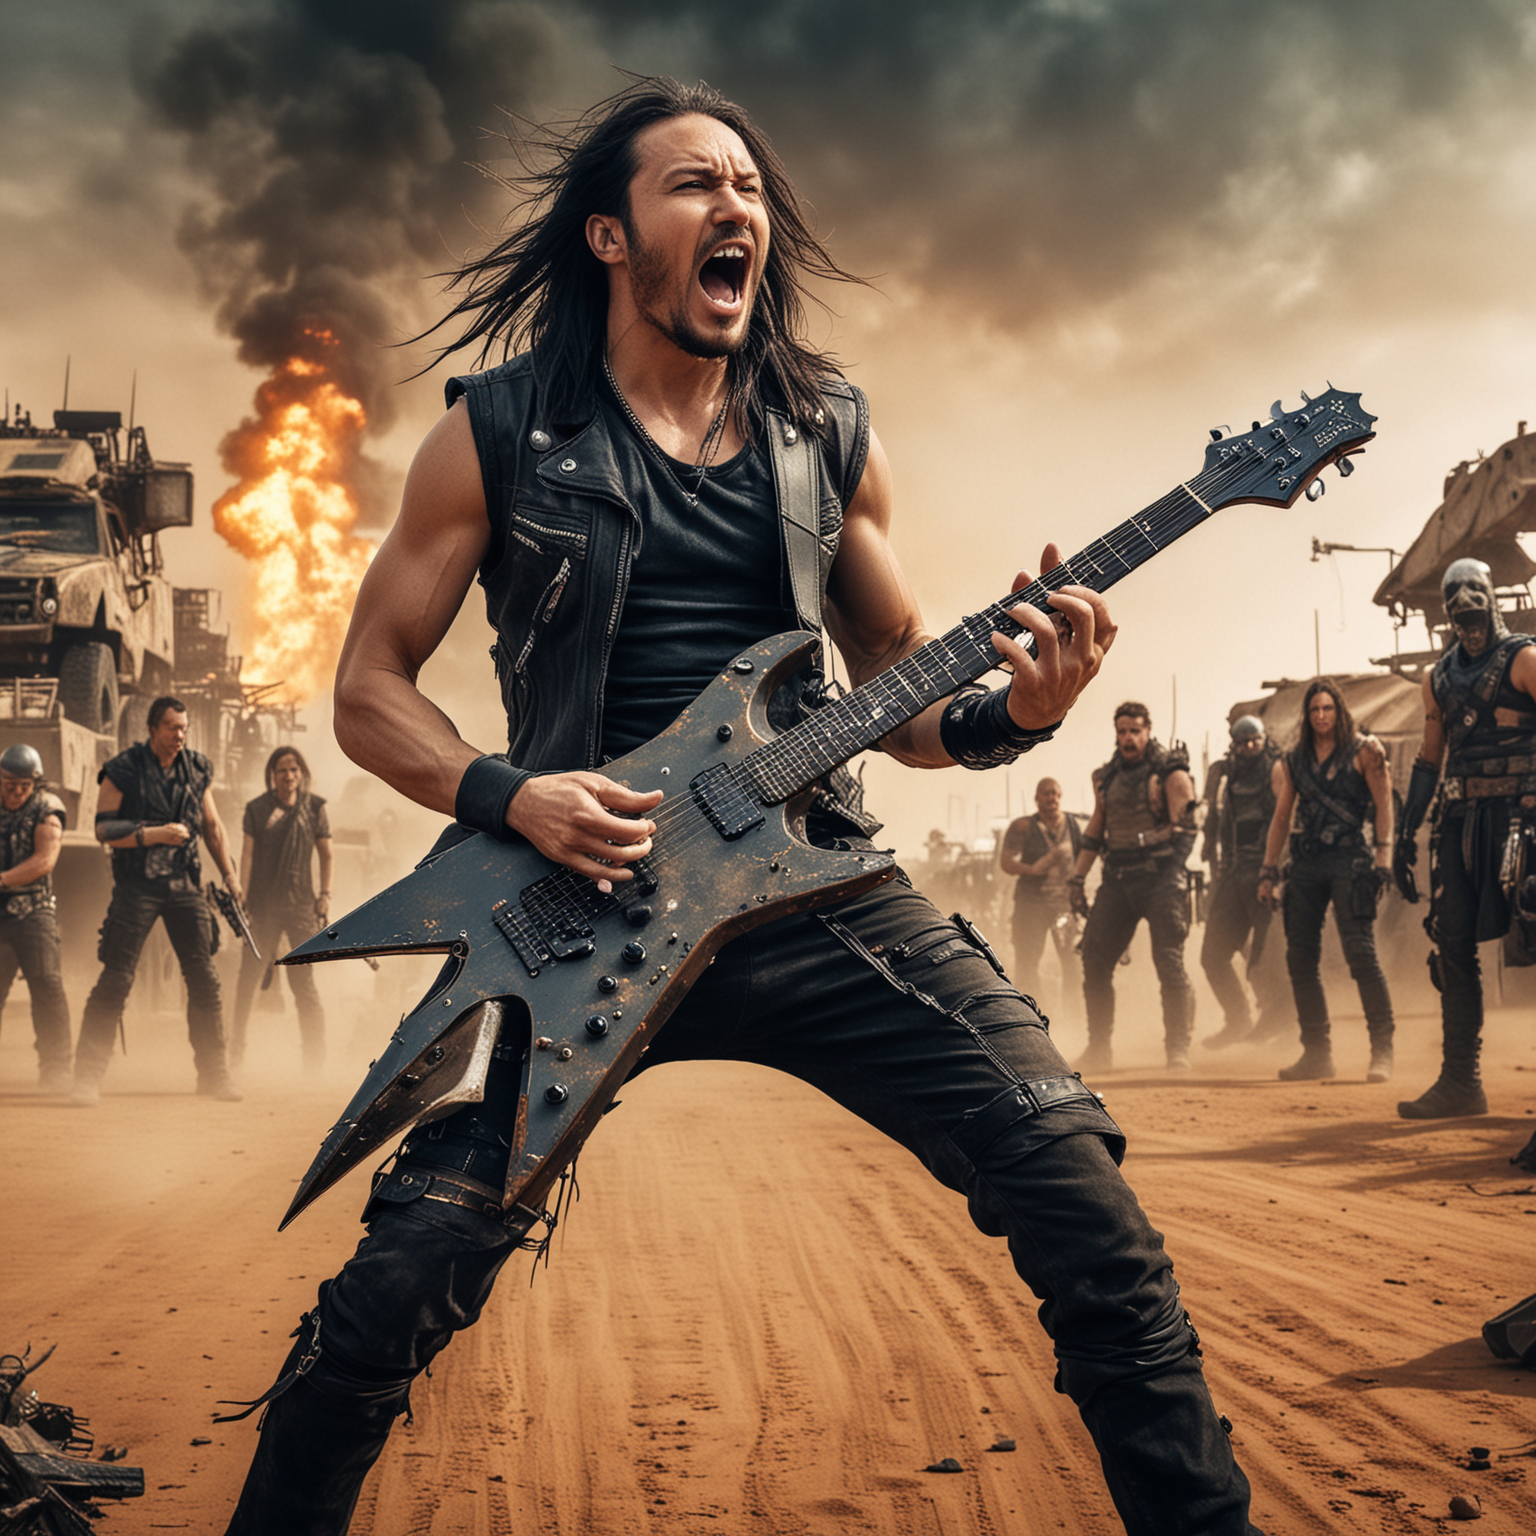 Herman from Dragonforce playing in front of a Mad Max style scene